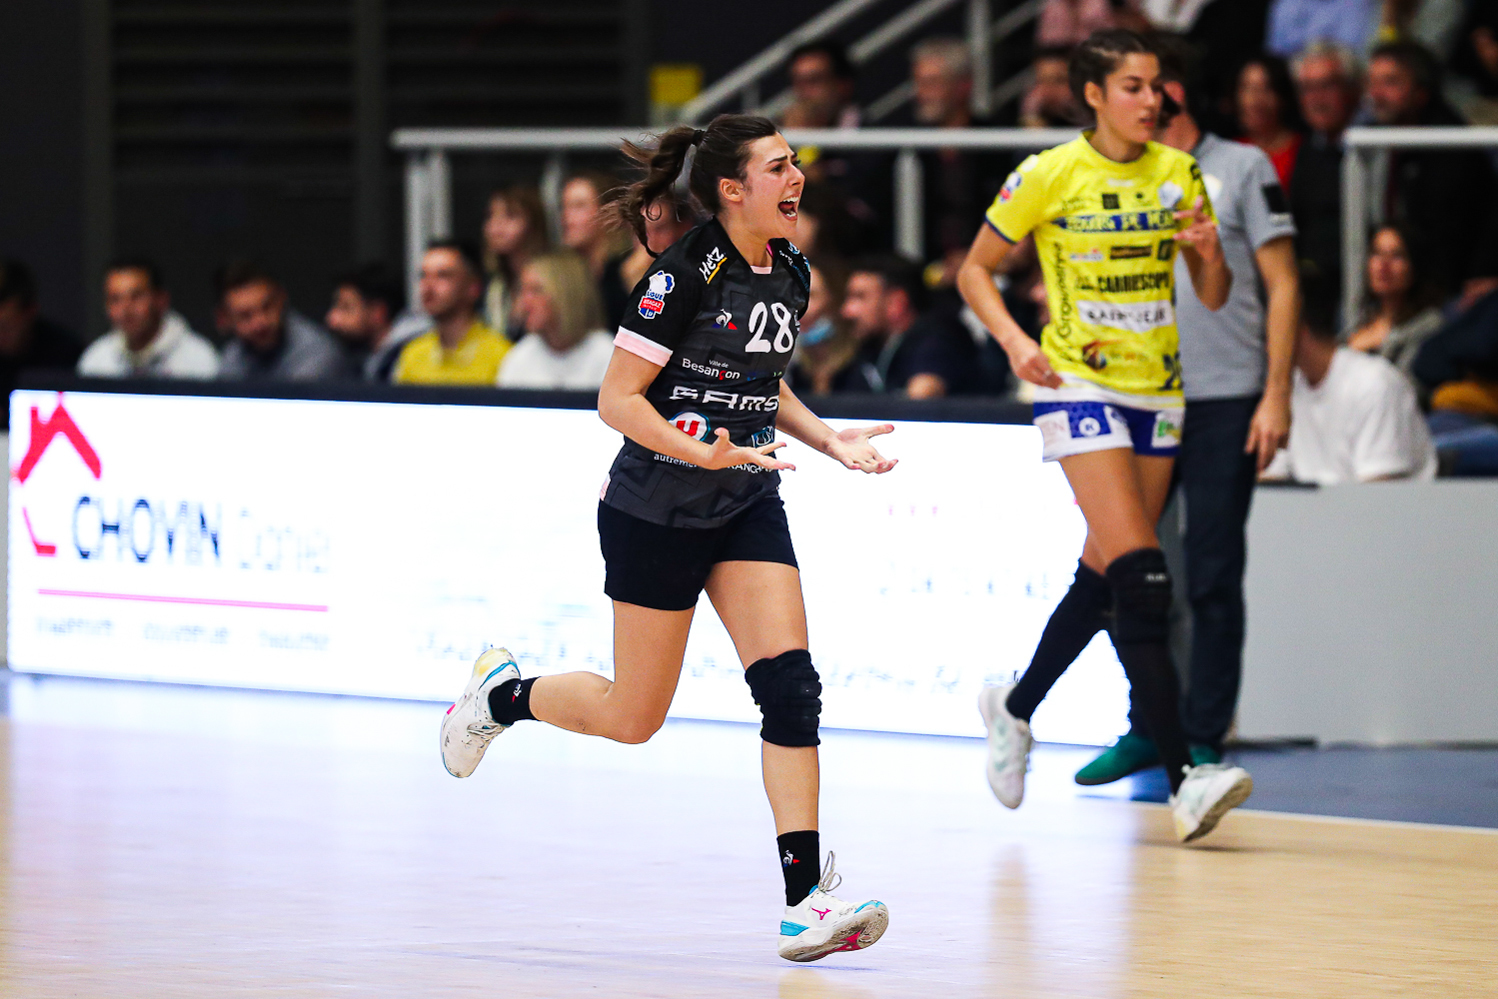 Lucie Granier (ESBF Besançon) during the Ligue Butaguaz Energie match between Bourg de Peage and Besancon on October 20, 2021 in Bourg-de-Peage, France. (Photo by Bertrand Delhomme/Icon Sport) -  (France)